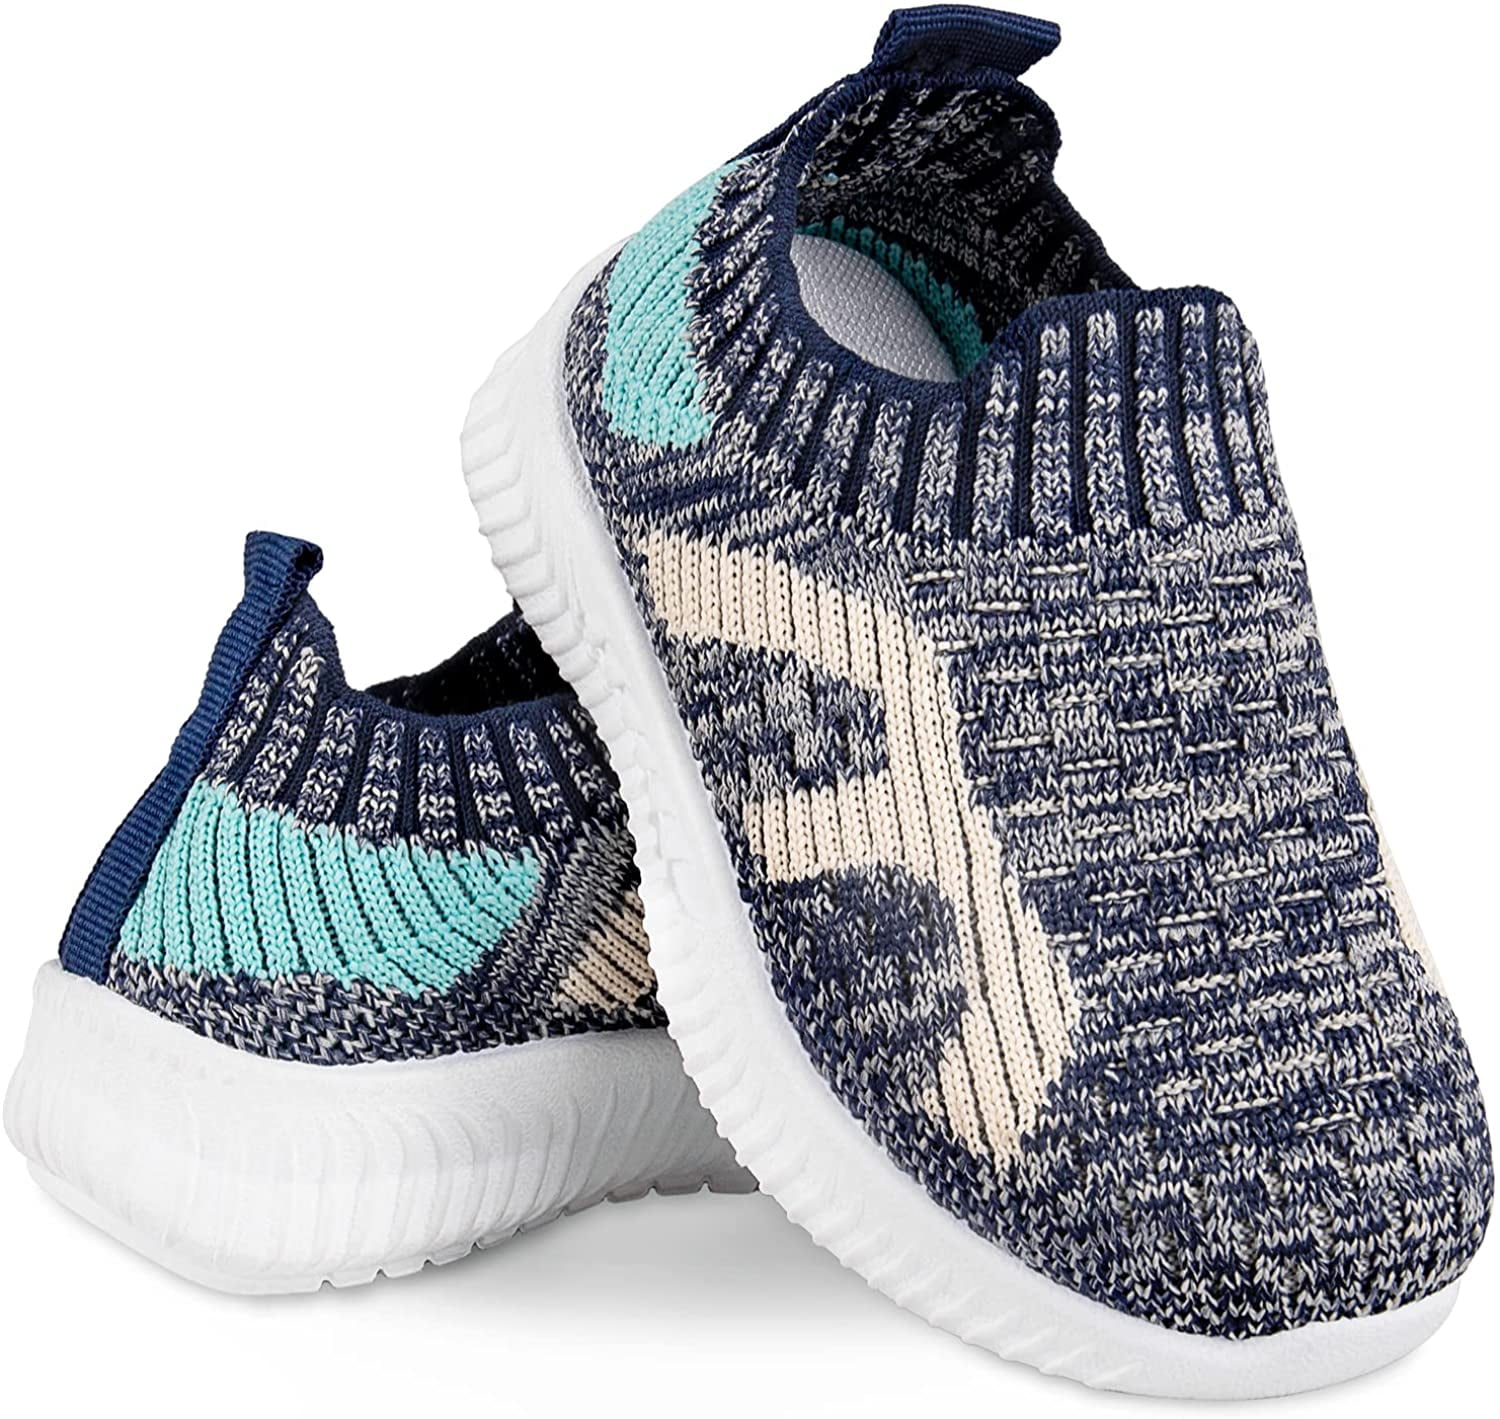 Baby Boys Girls Walkers Infant Sneakers Mesh Breathable Lightweight Toddler Casual Shoes Non Slip Cotton Flying Woven Fabric Mesh Breathable Lightweight Slip-on Trainers Indoor-Outdoor 